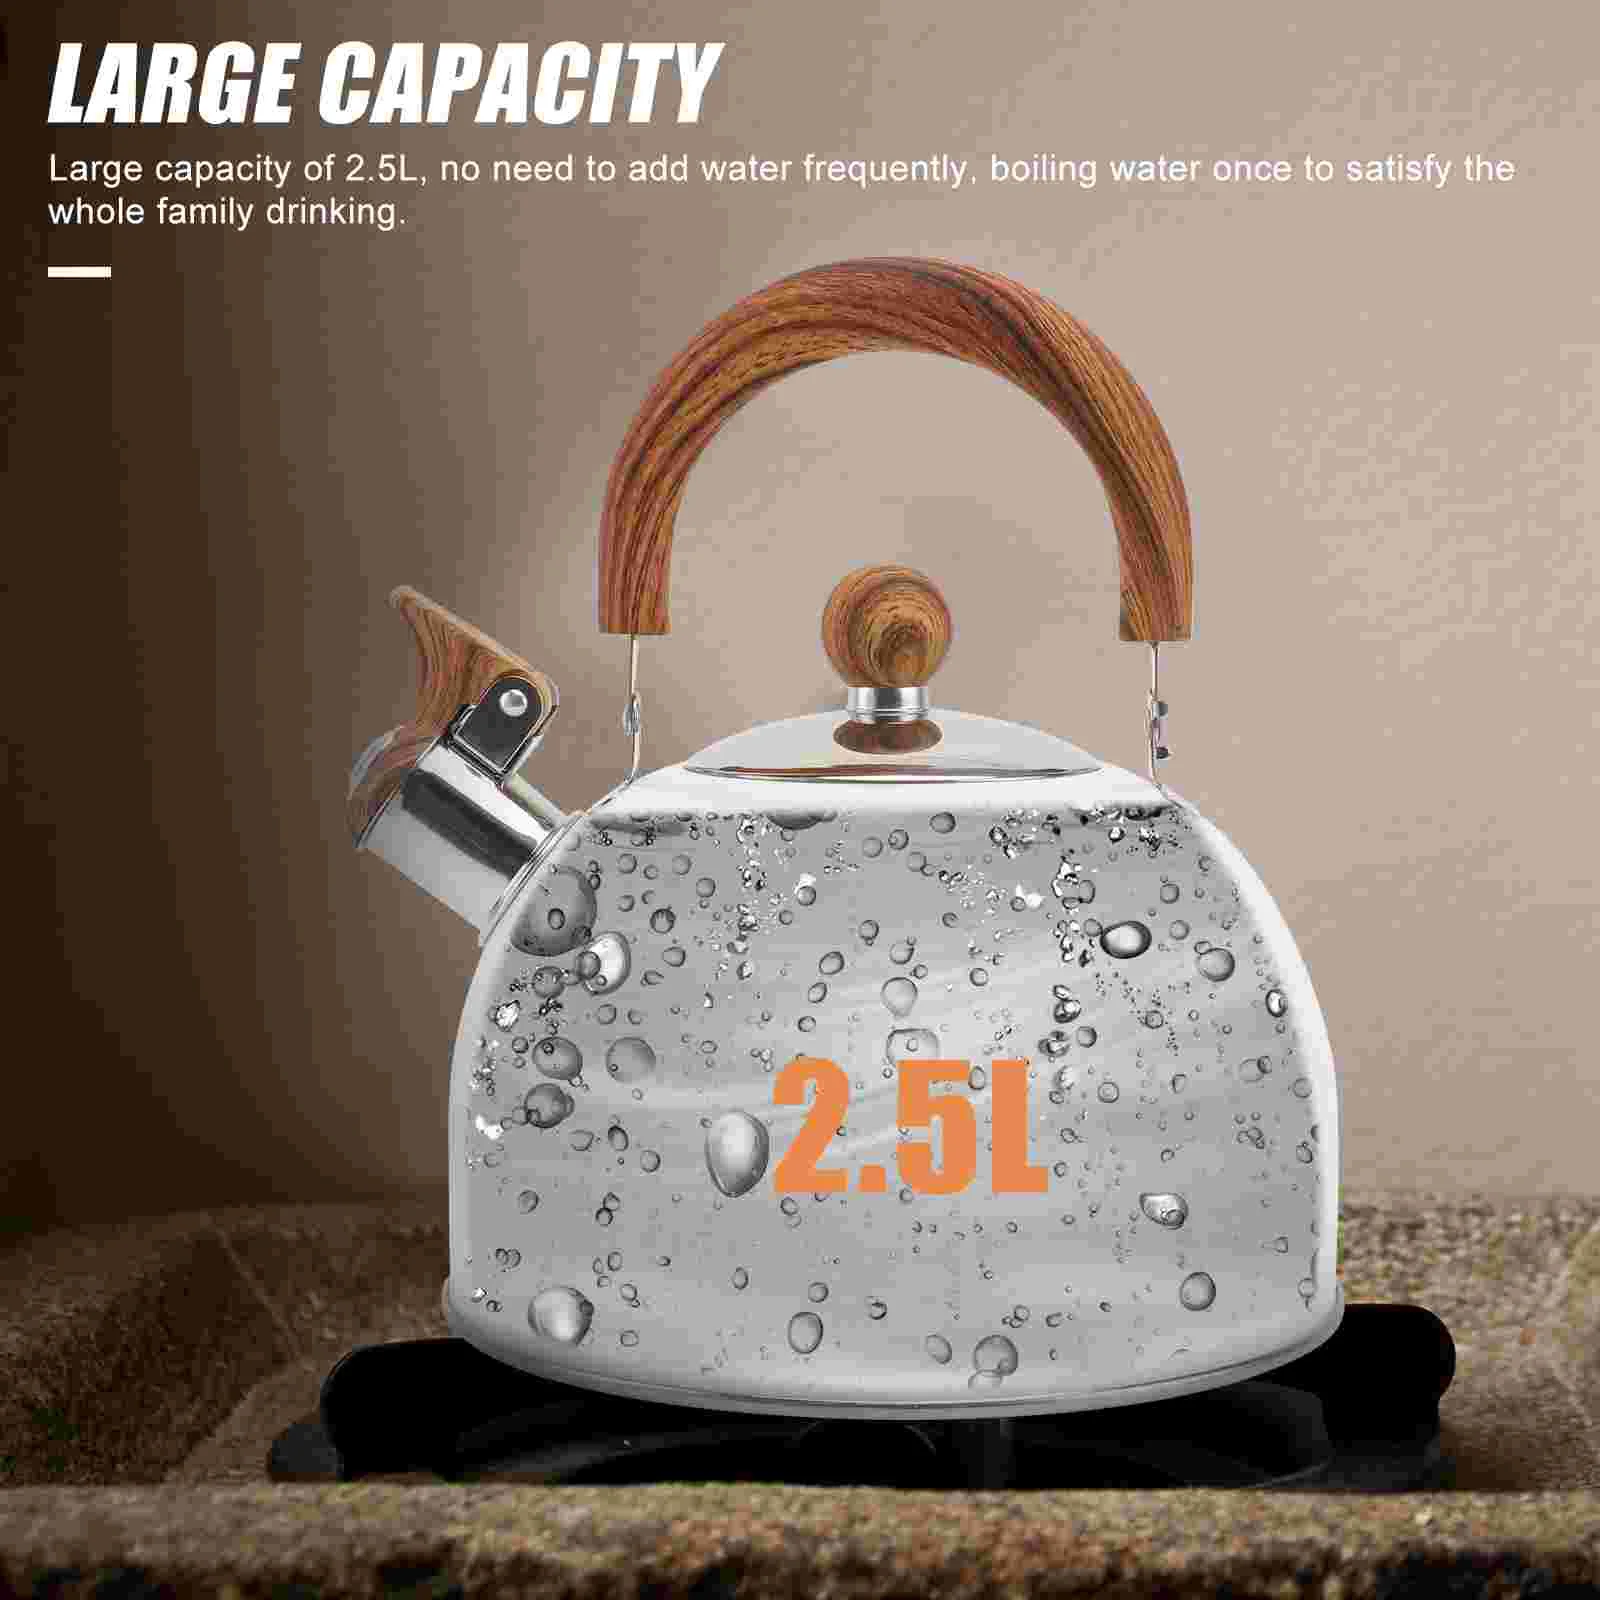 

Chirping Kettle Coffee Filter Home Water Kitchen Heating Boiling Container Whistling Nylon Whistle Teakettle Make